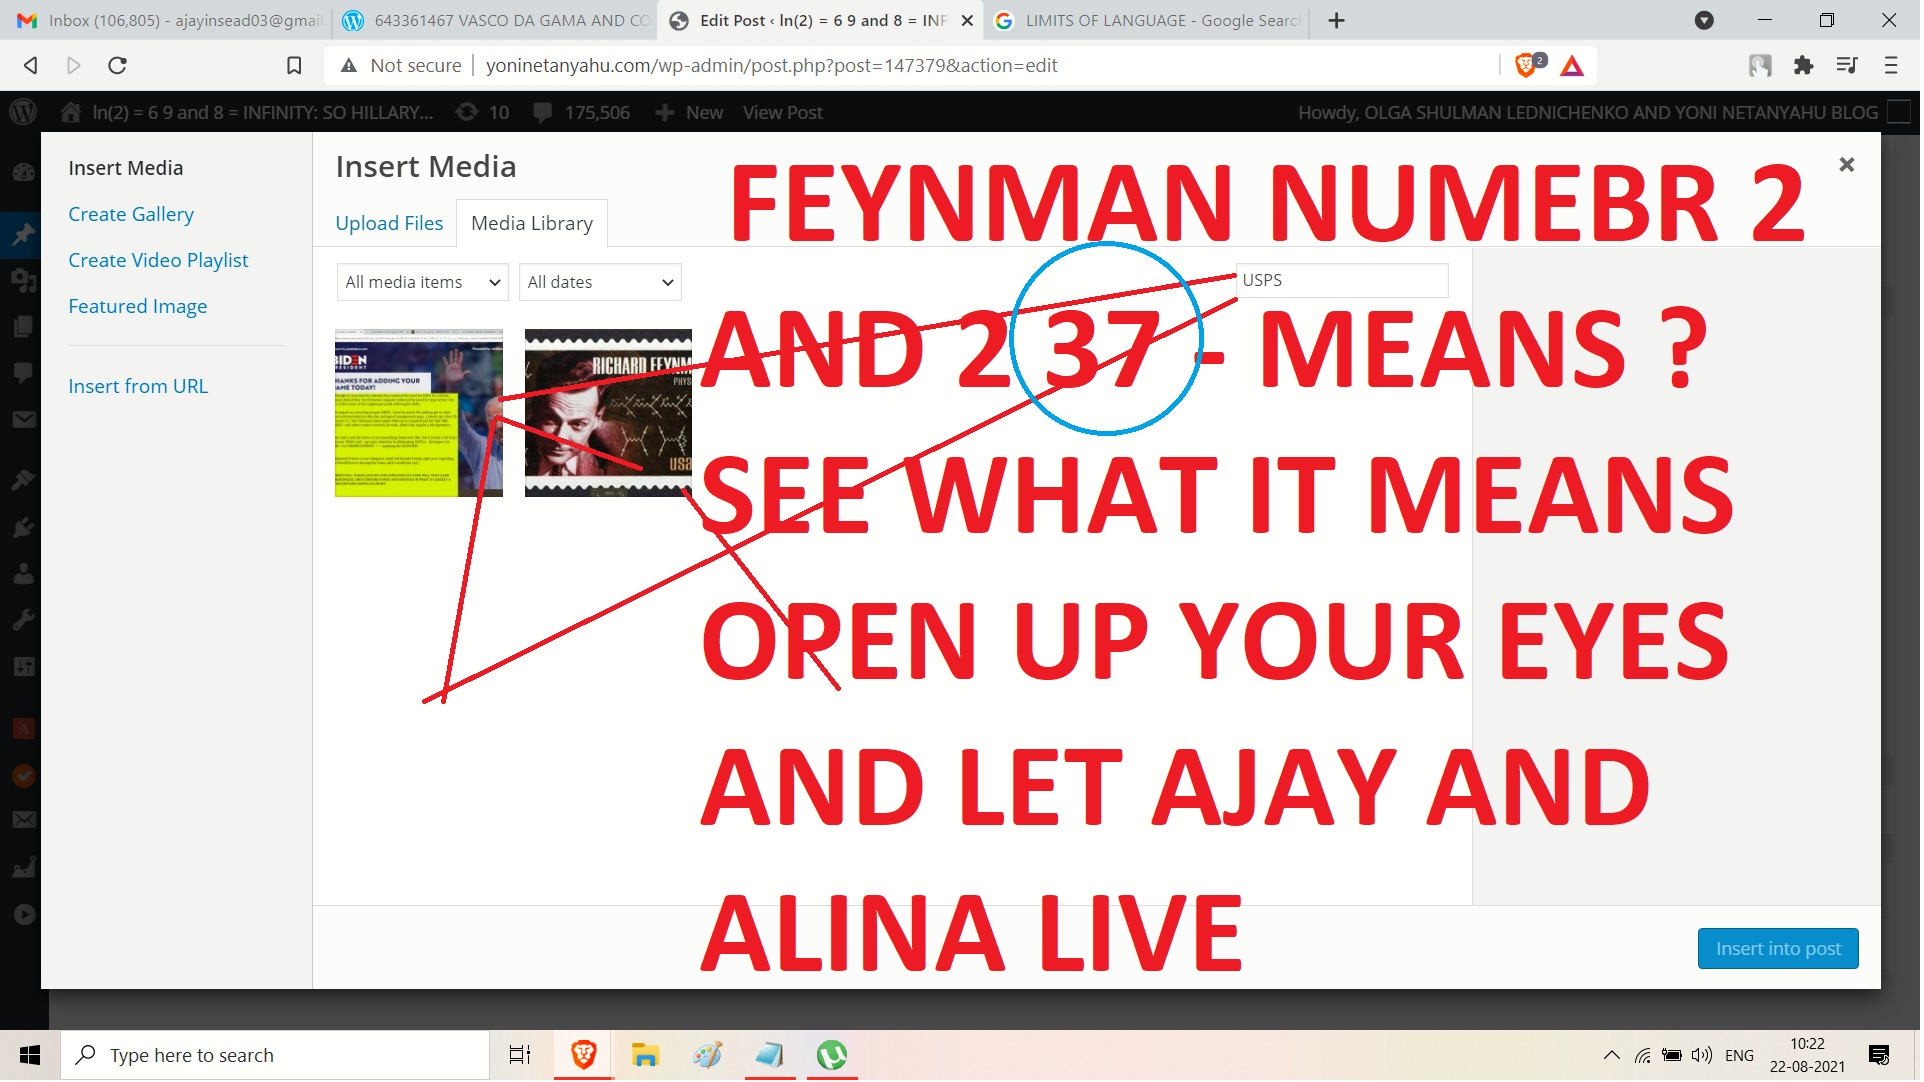 FEYNMAN NUMBER 2 LETTERS - AND 237 MENS CAMEROON - OK DAVID - AND SEE WHAT I T MENS - ND USPS AND NOW OPEN YOUR EYE S AND LETAJAY AND ALINA MATSENKO LIVE